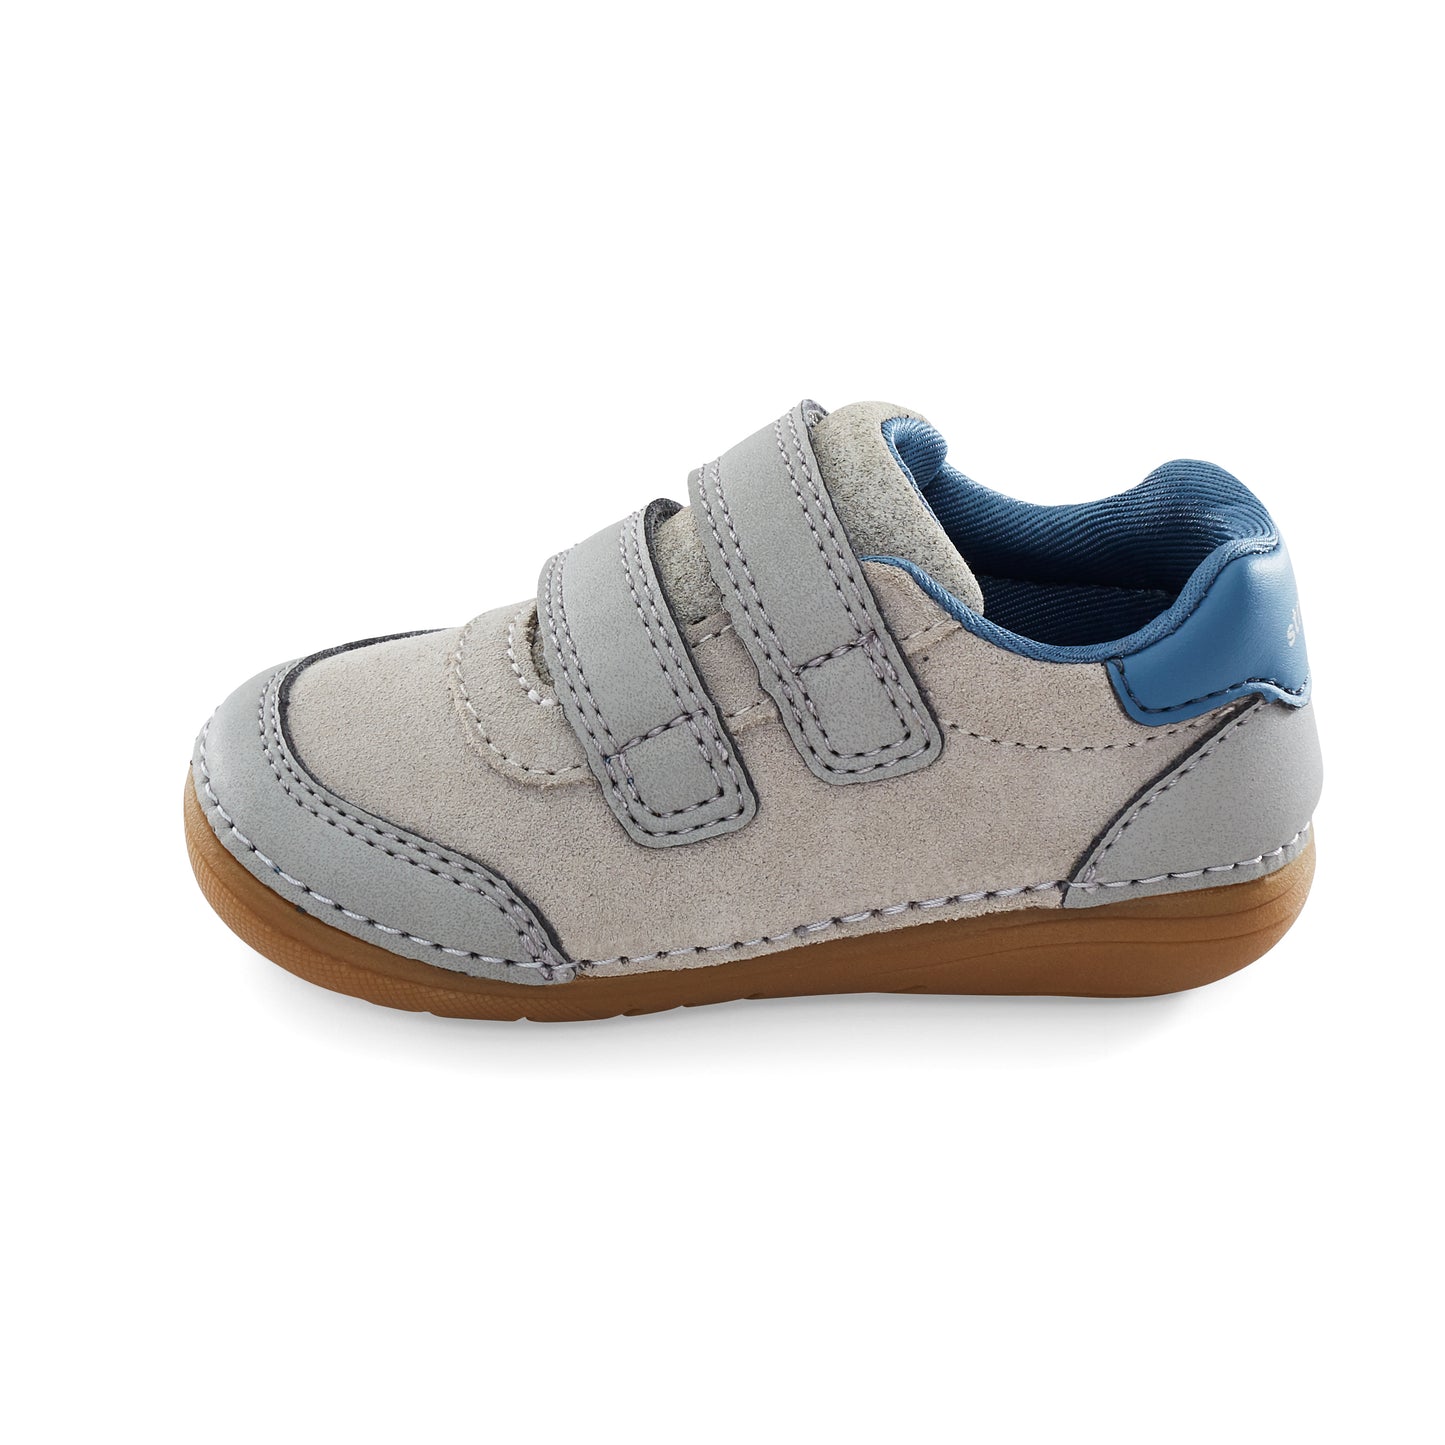 soft-motion-zips-kennedy-sneaker-littlekid-taupe-blue__Taupe/Blue_4